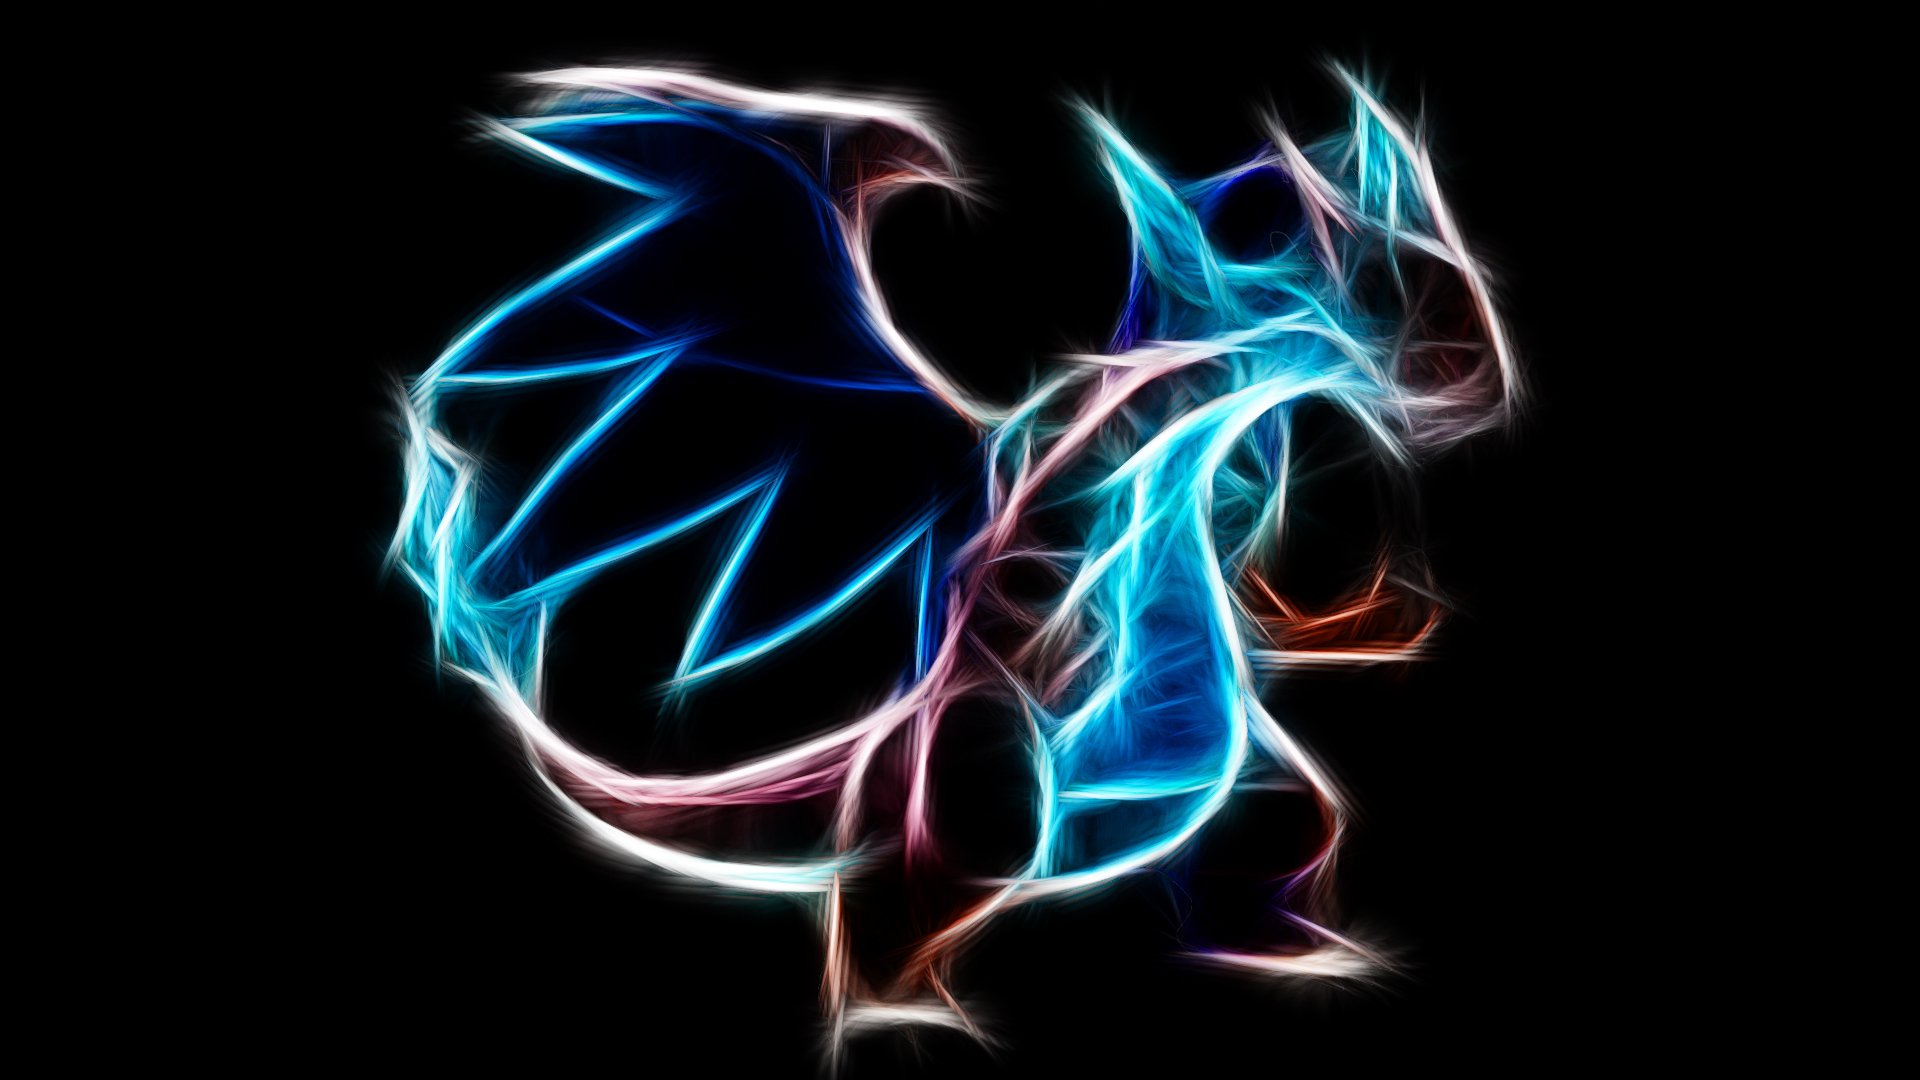 Charizard Wallpaper Image Photos Pictures Background